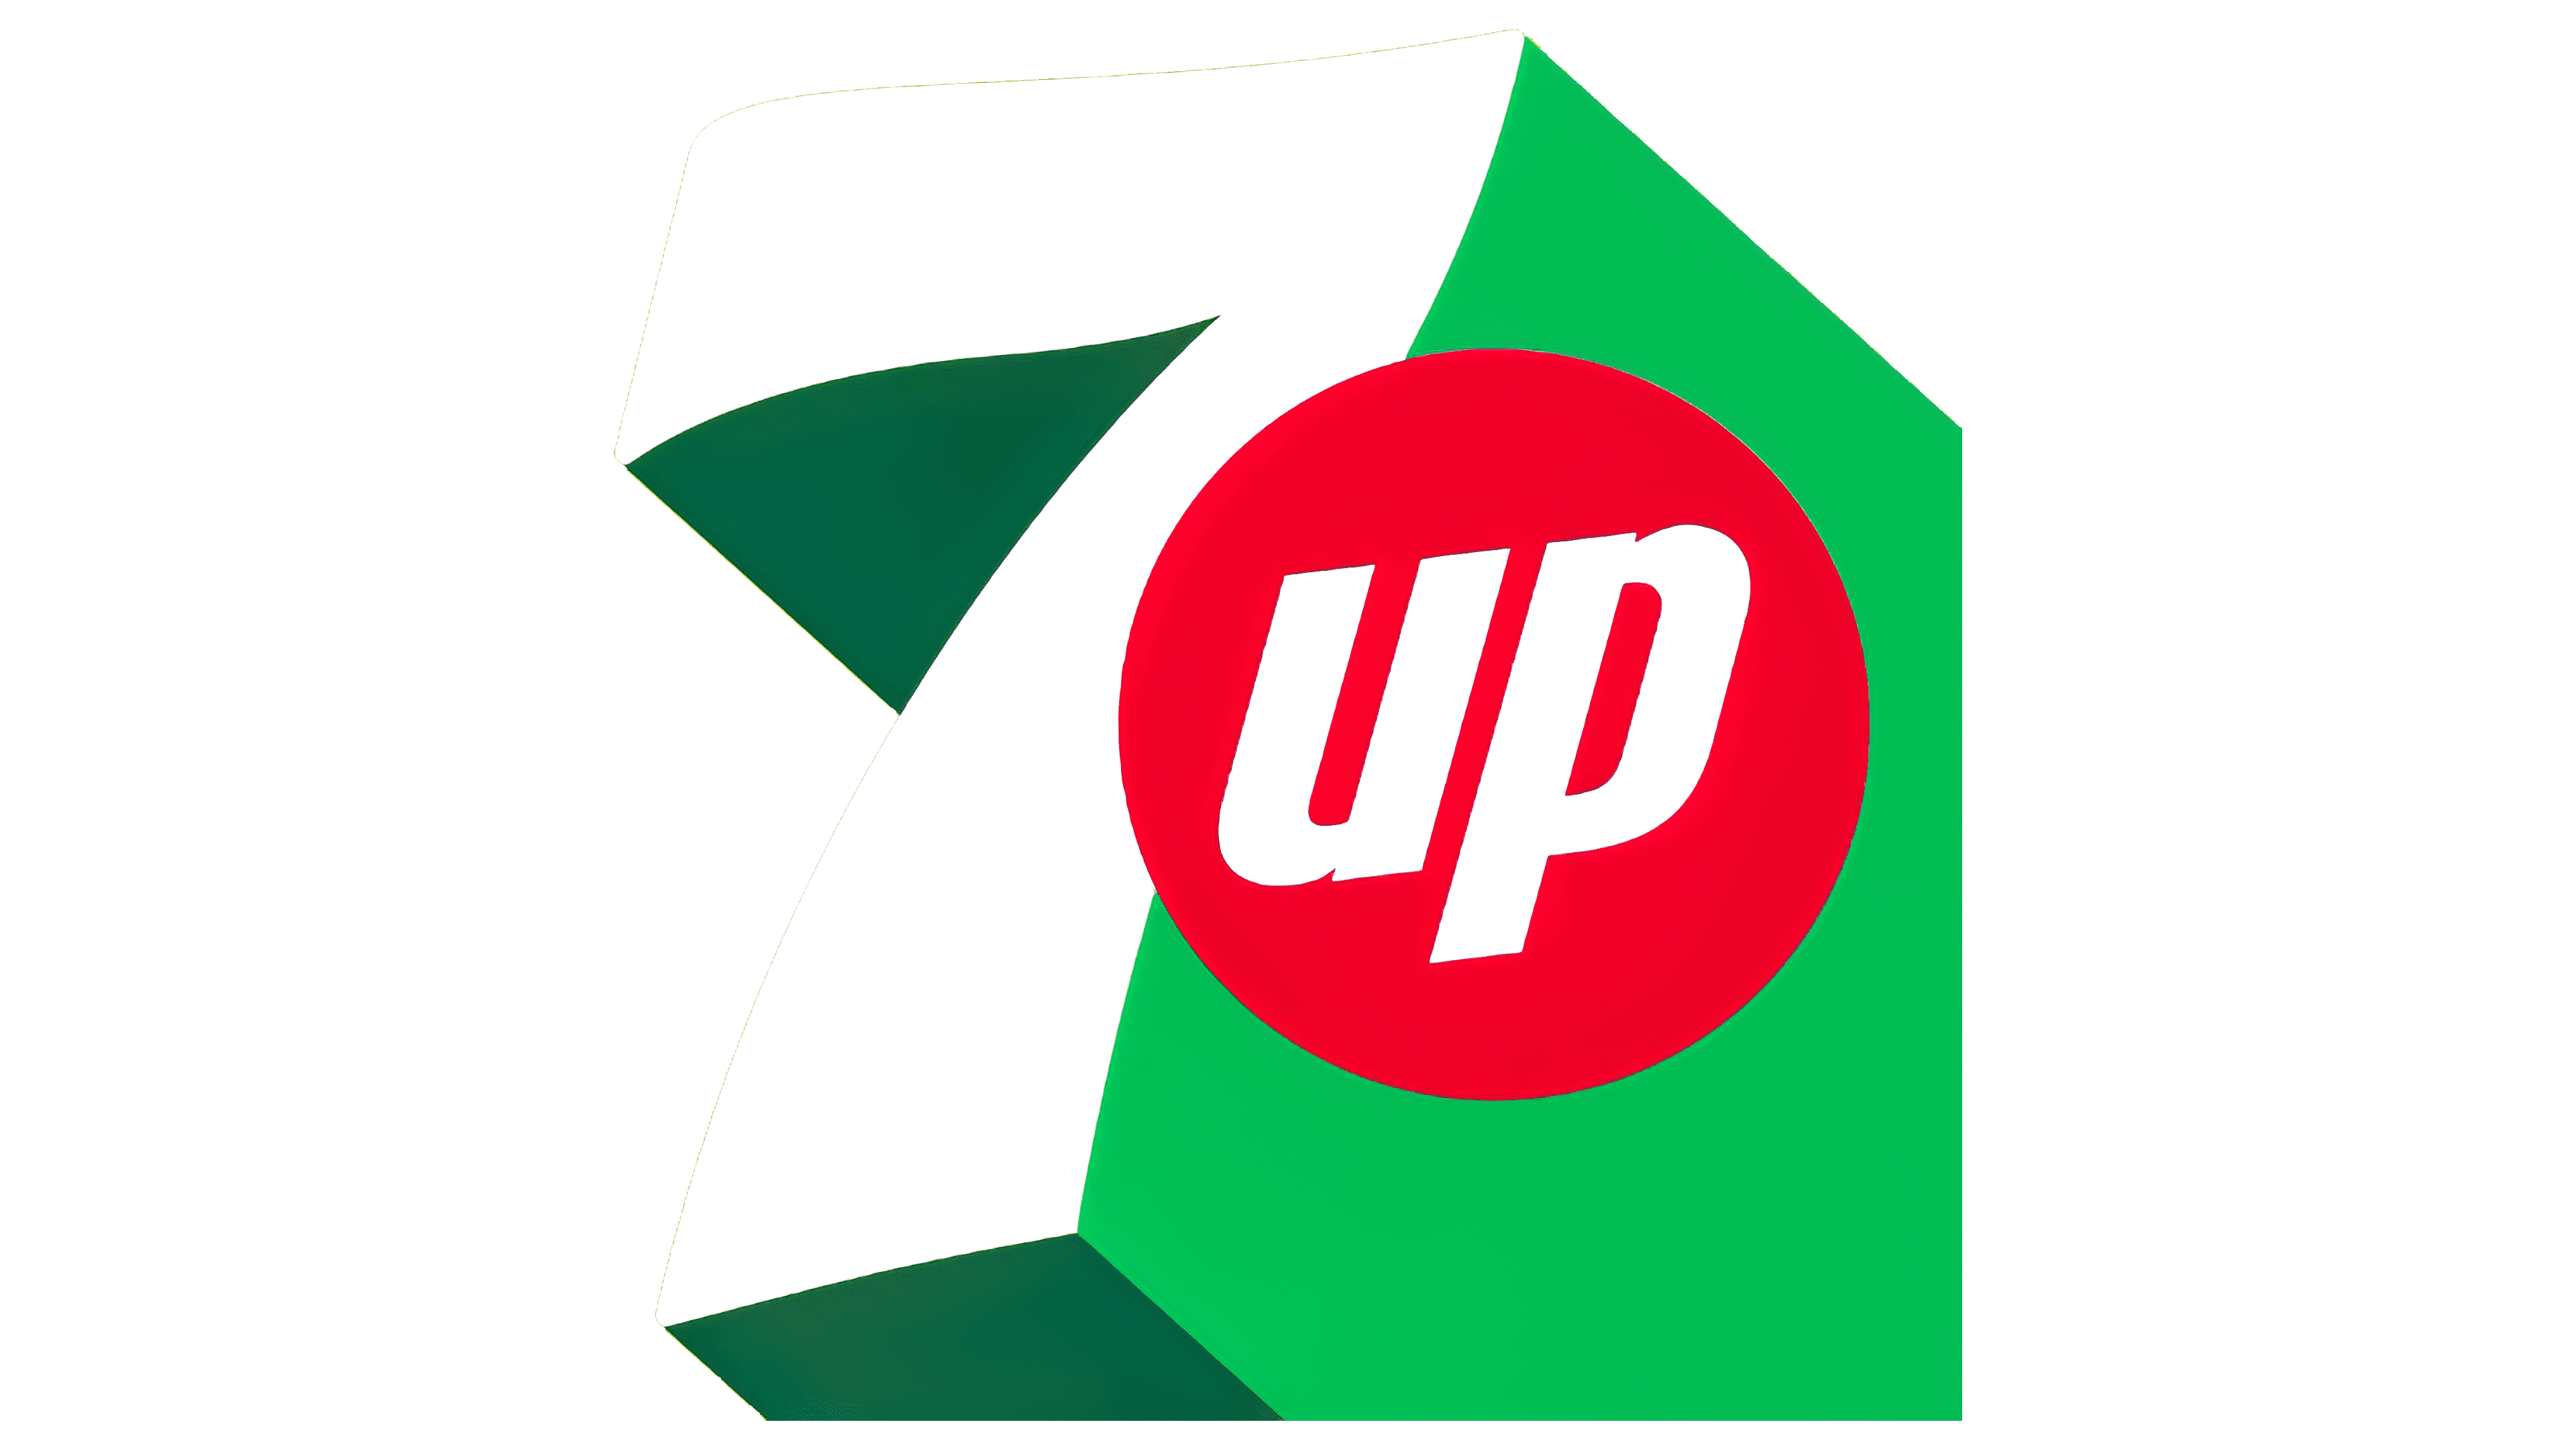 PepsiCo Unveils New Visual Identity For 7UP